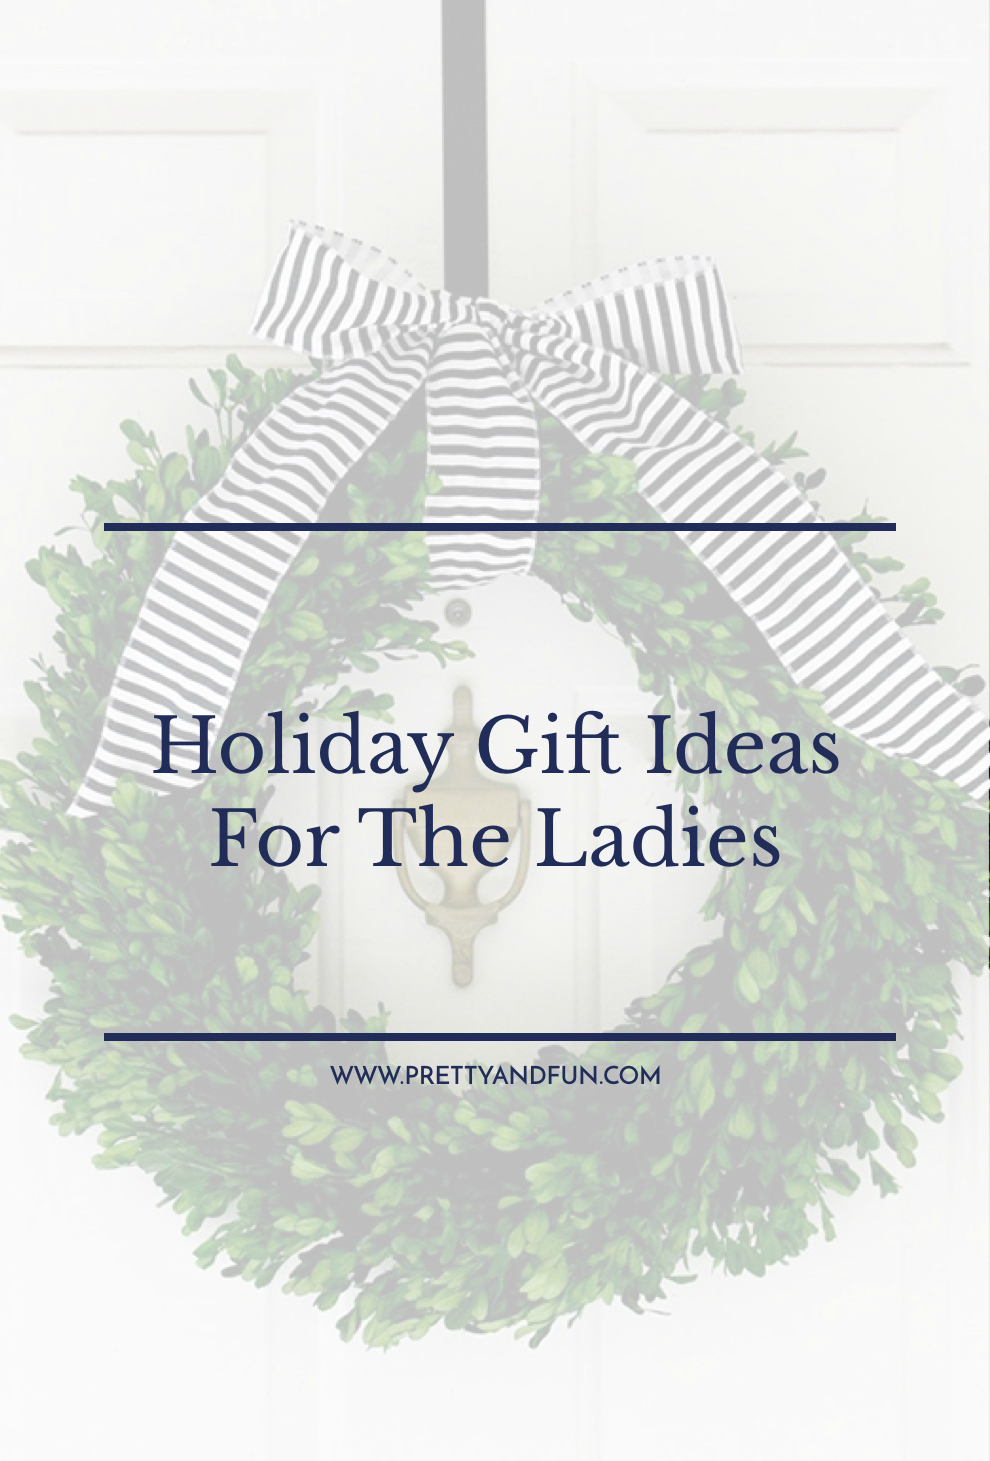 The Best Holiday Gift Ideas for the Women in Your Life.